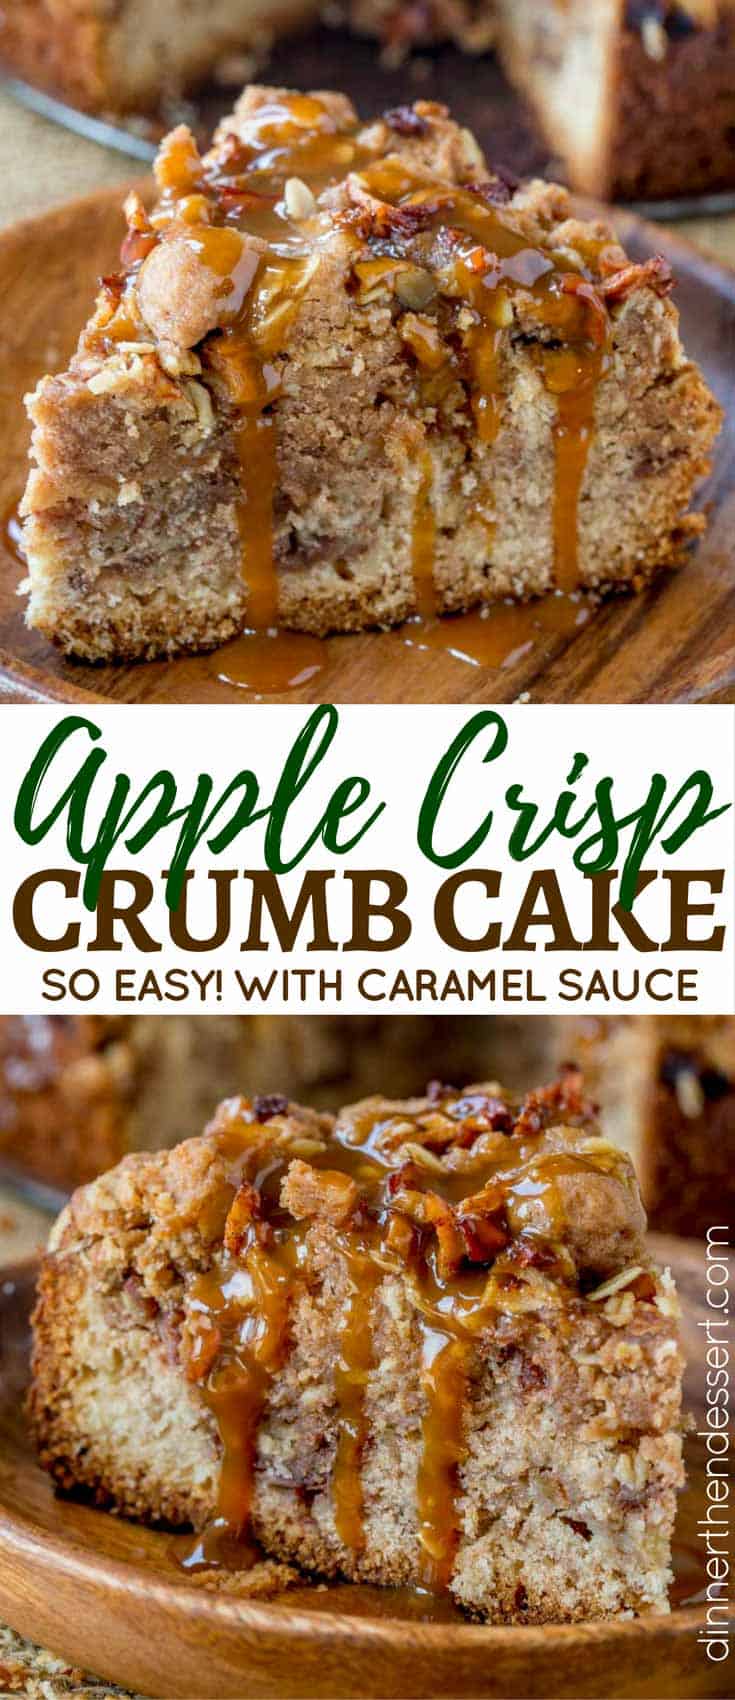 Apple Crisp Crumb Cake is the perfect mix of the classic New York Crumb Cake with large chunks of buttery crumb topping and the ultimate apple crisp.